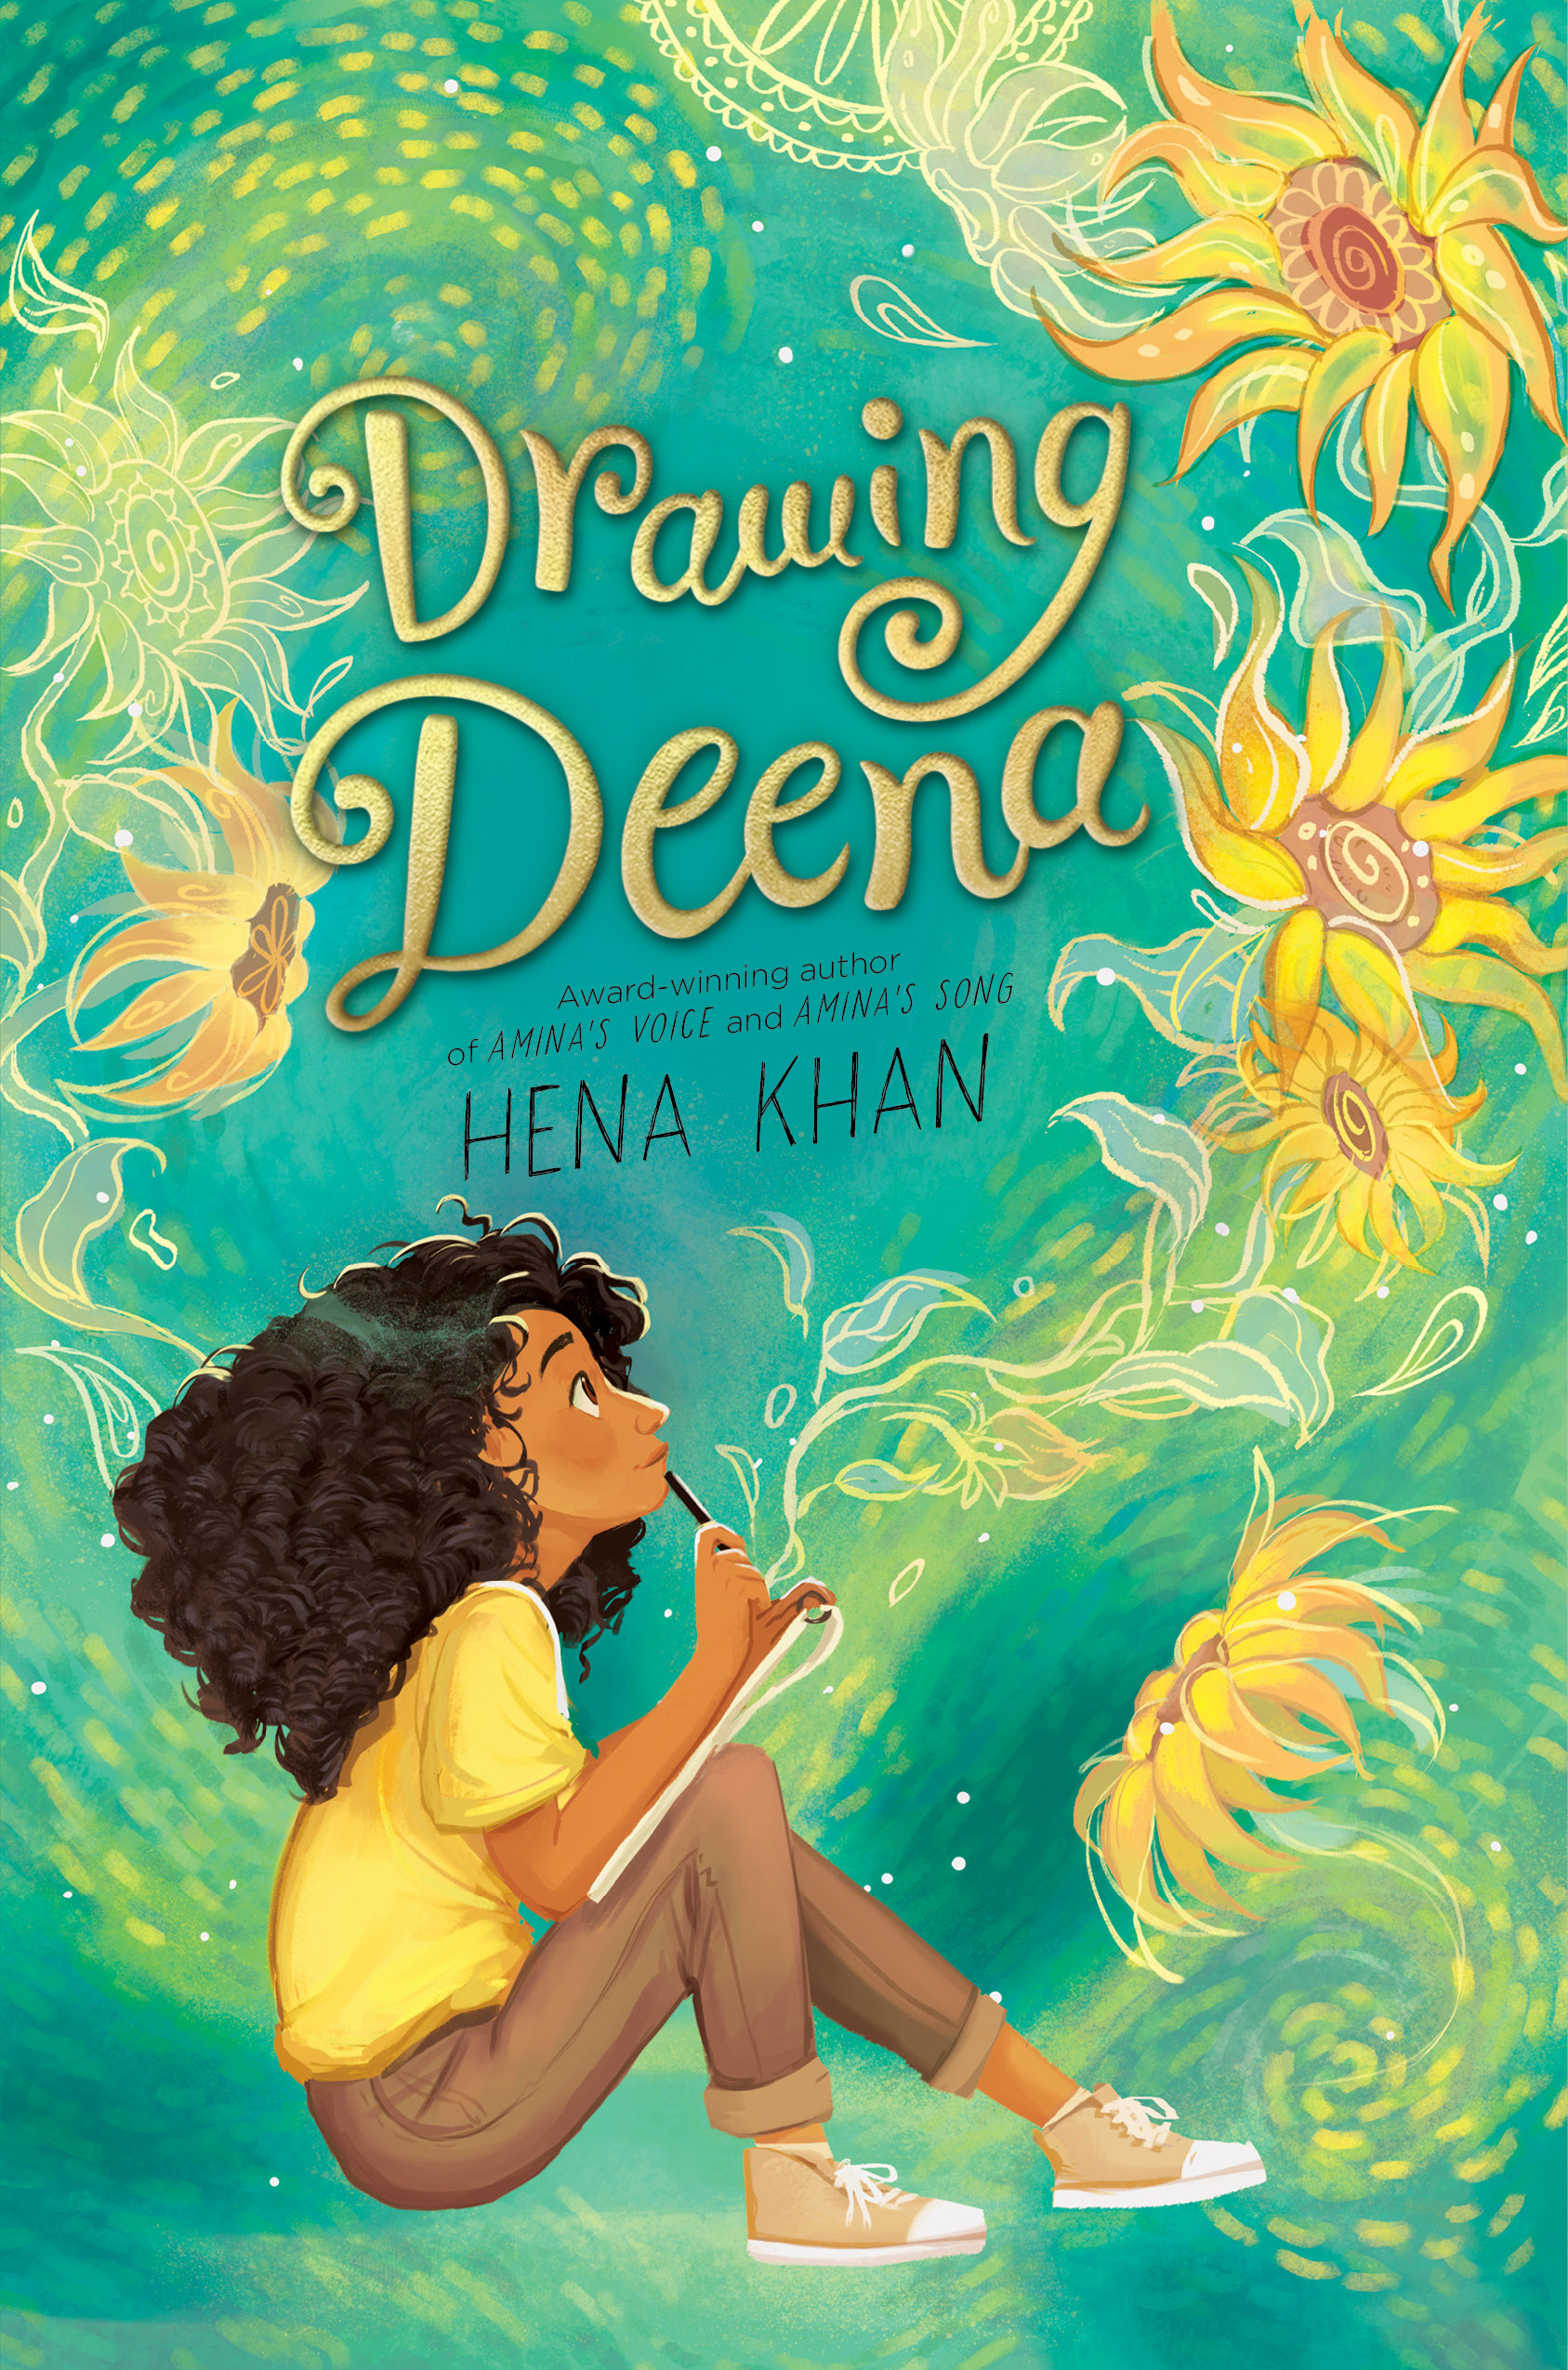 Image for "Drawing Deena"